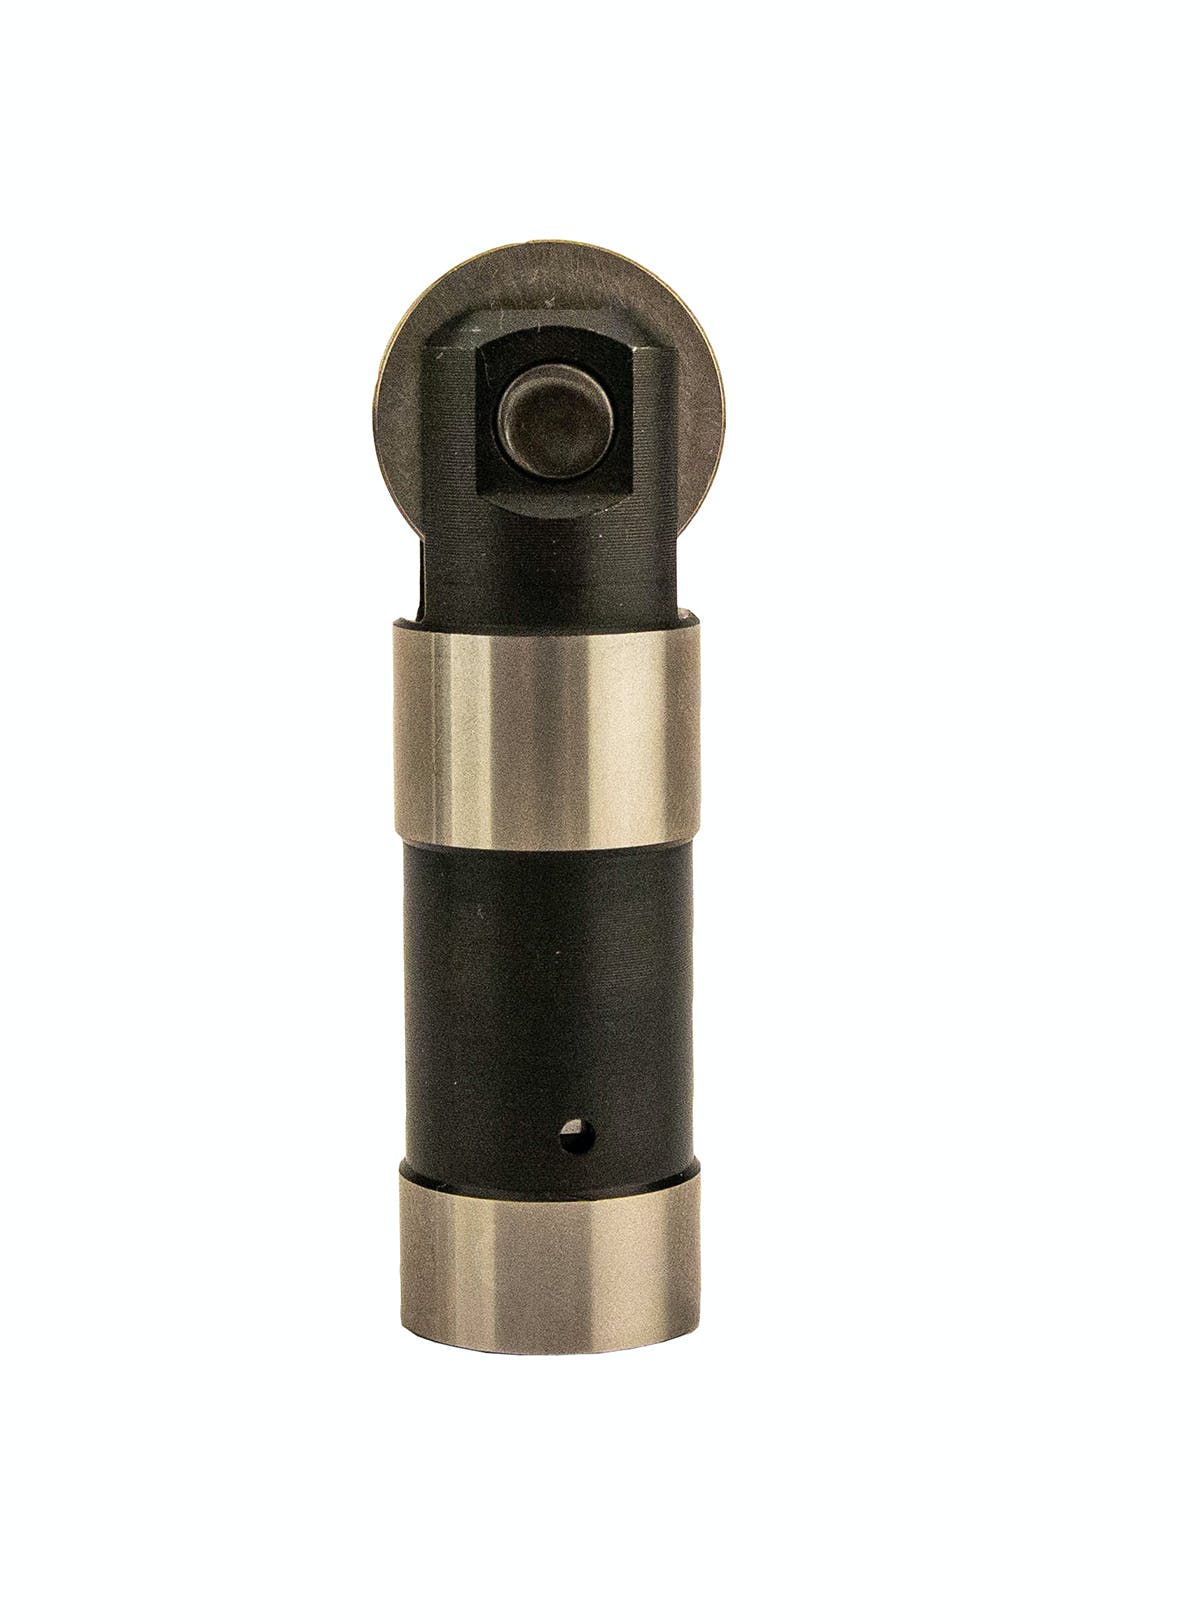 Competition Cams 7390-1 Harley Evo Forged Hydraulic Roller Lifter